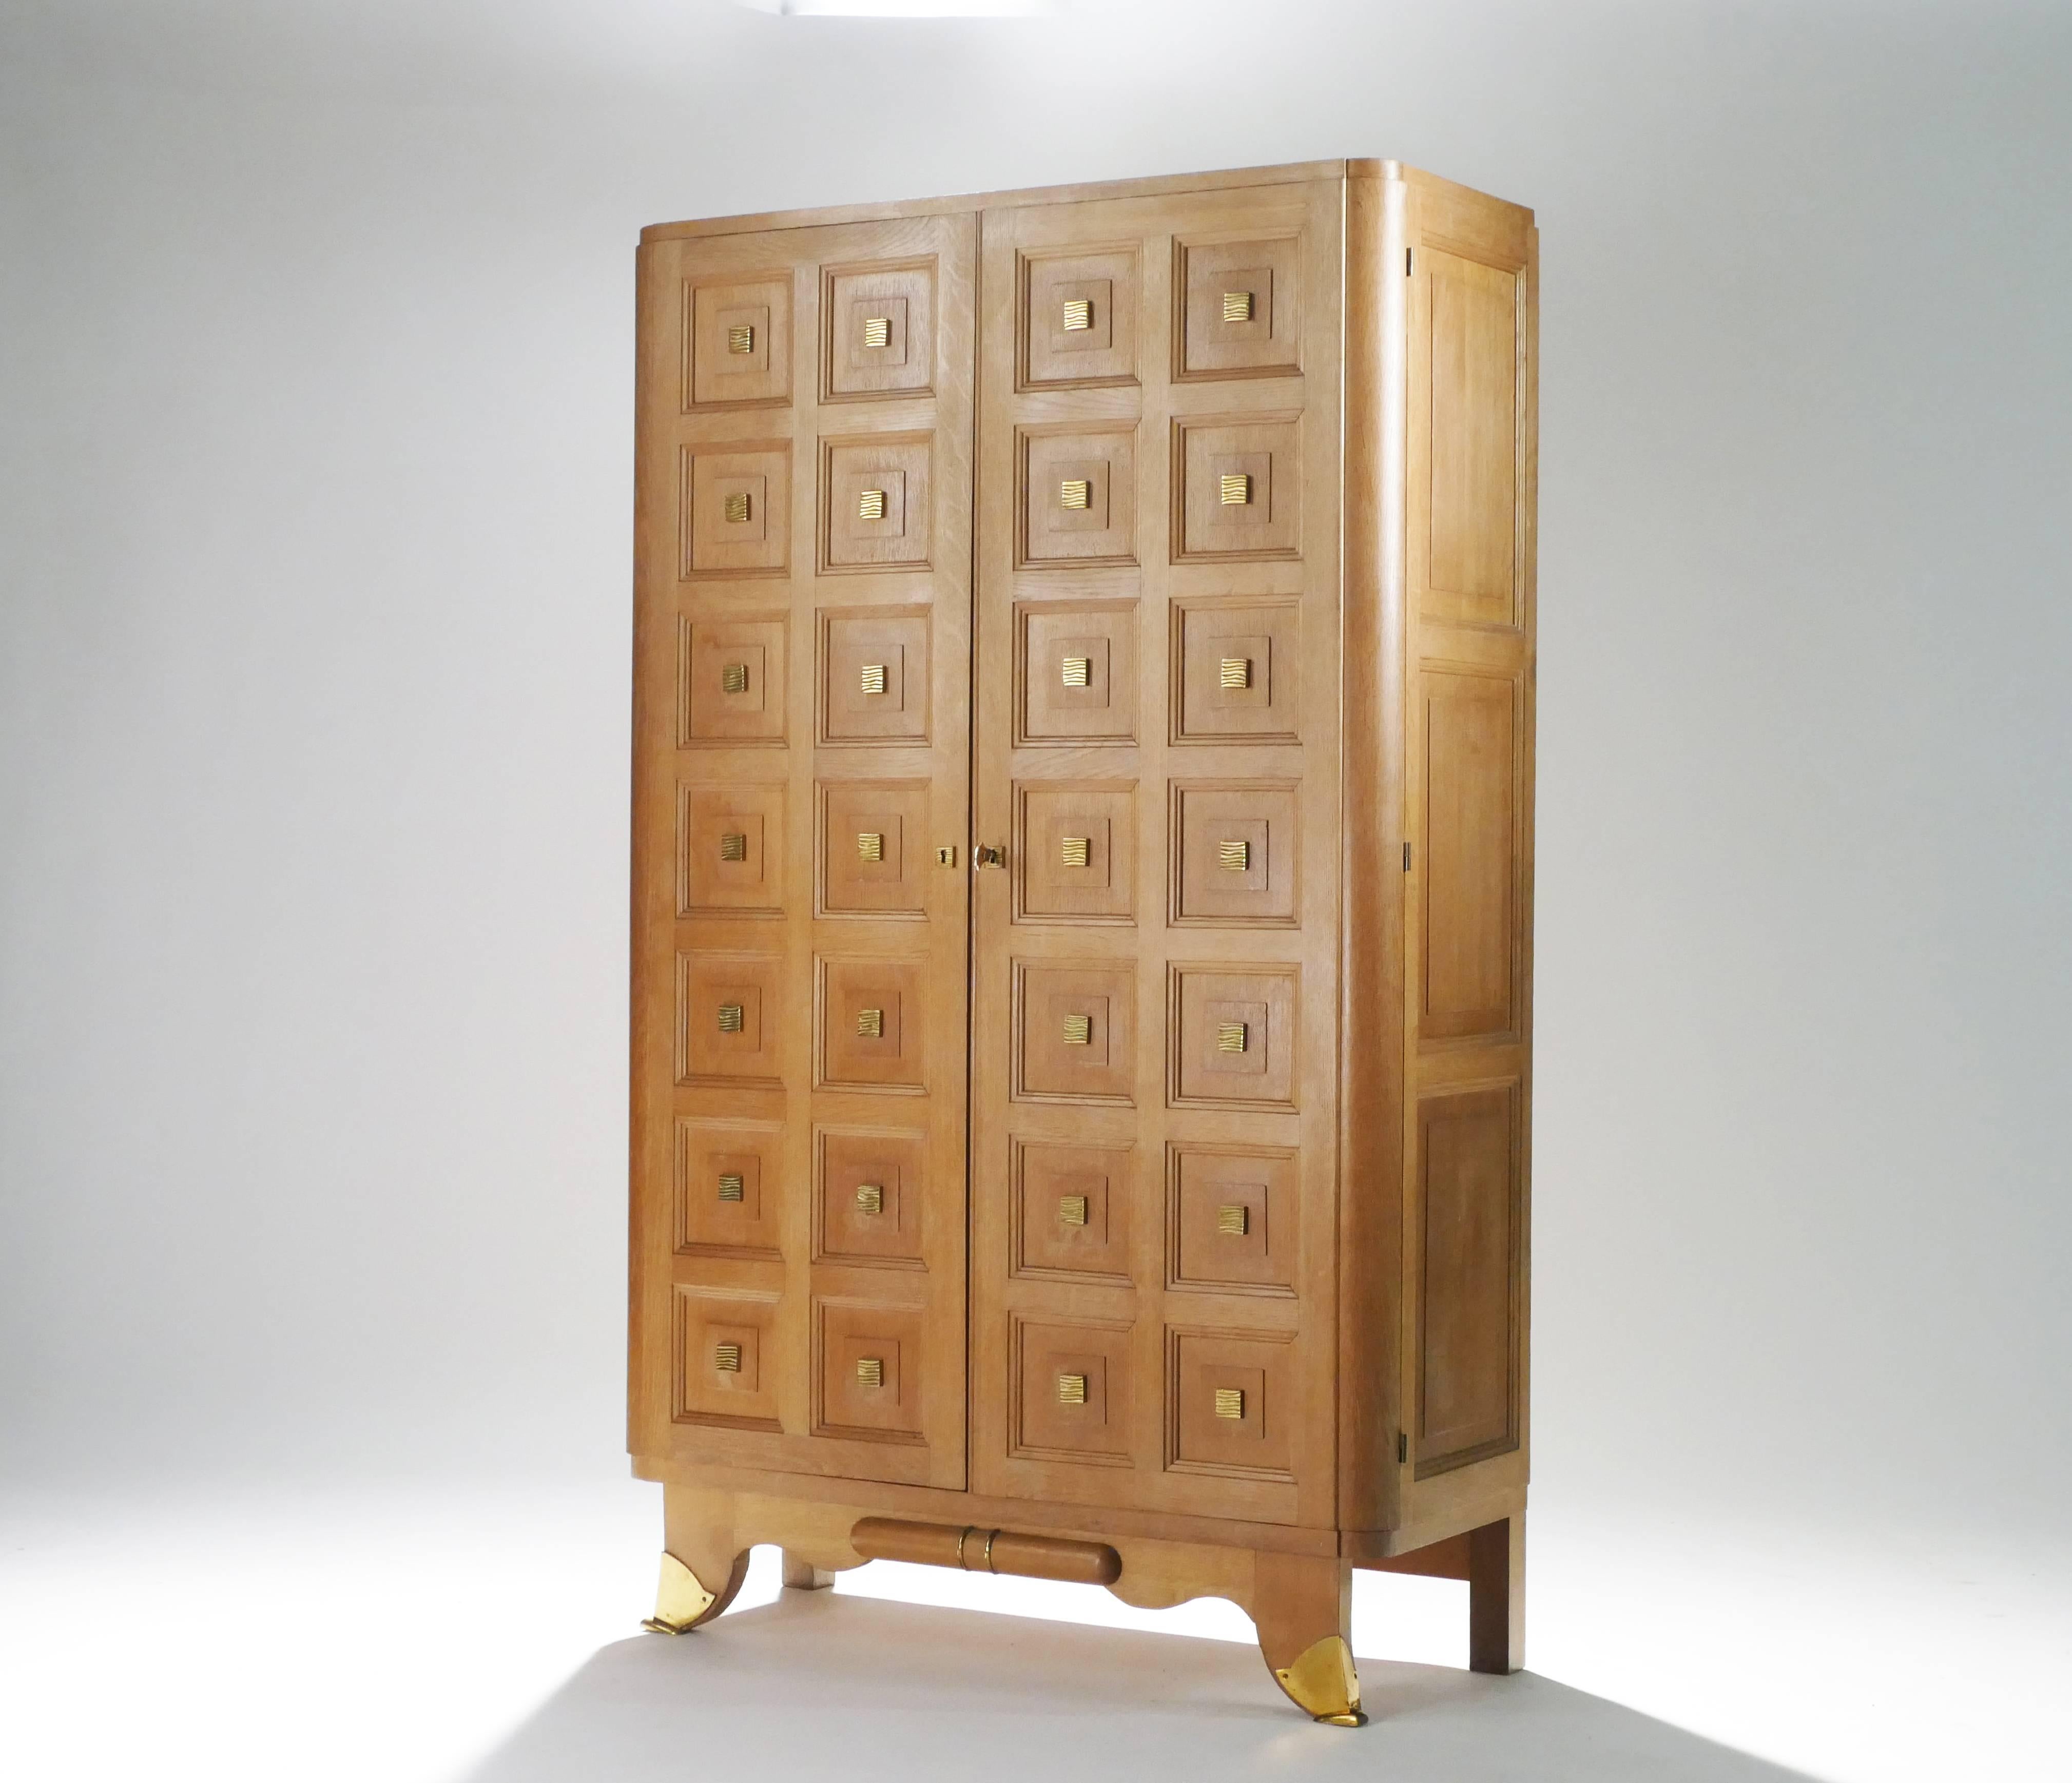 Spacious shelves make this large oak cabinet suitable as a bedroom wardrobe or as a multipurpose and decorative cabinet in an entryway or living room. The cabin doors and feet are adorned with quality bronze, and the inner shelves feature original